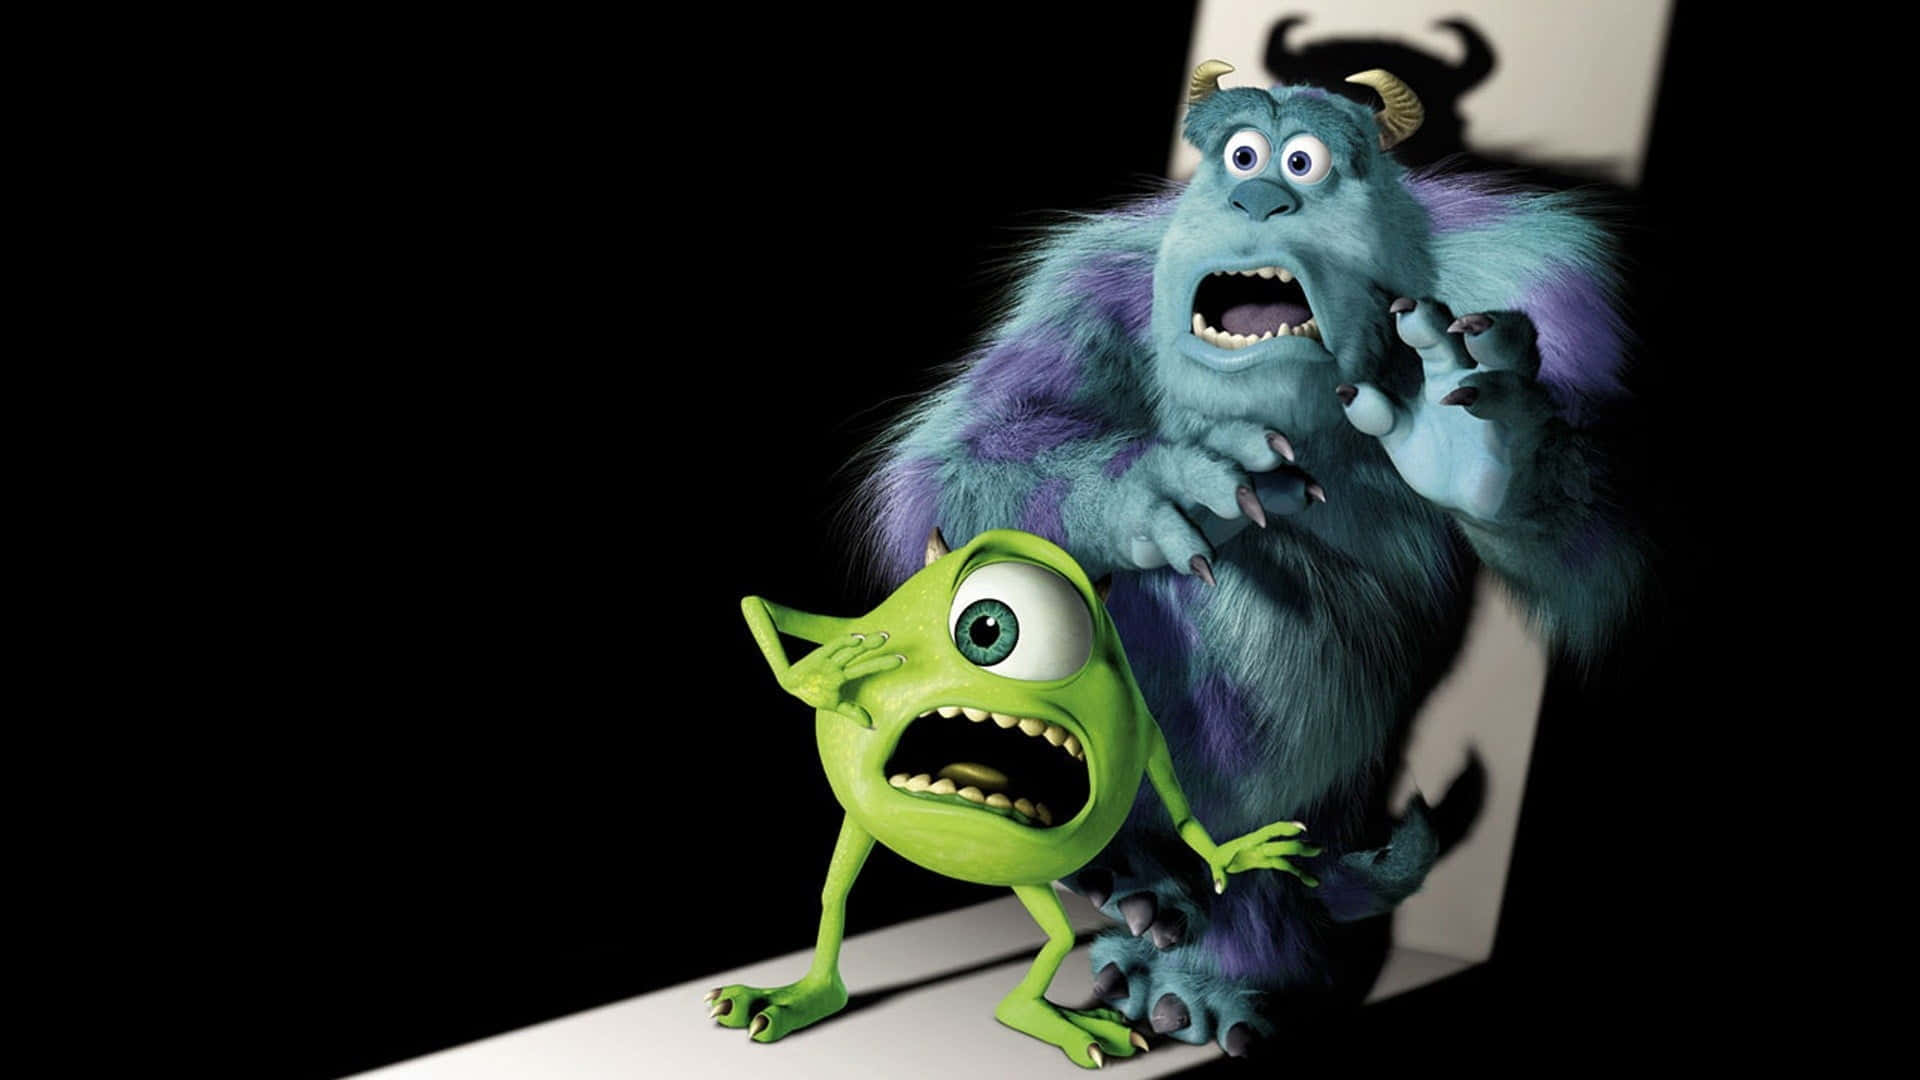 Mike and Sulley - Best of Friends